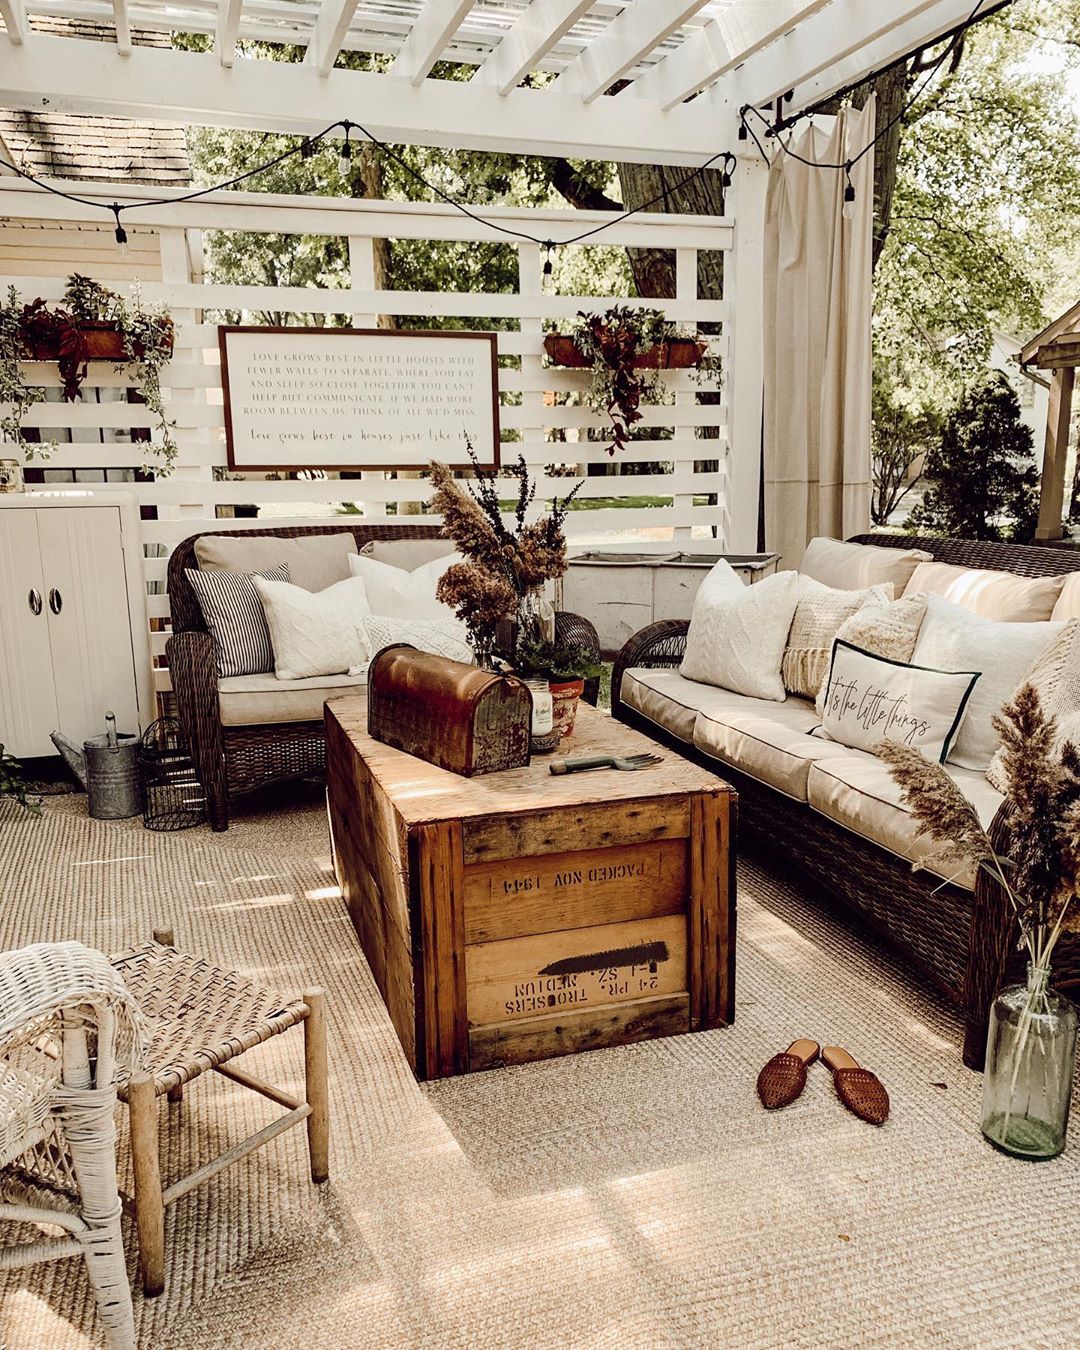 Outdoor patio with tan couches and wooden crate table. Photo by Instagram user @candlewoodcottage